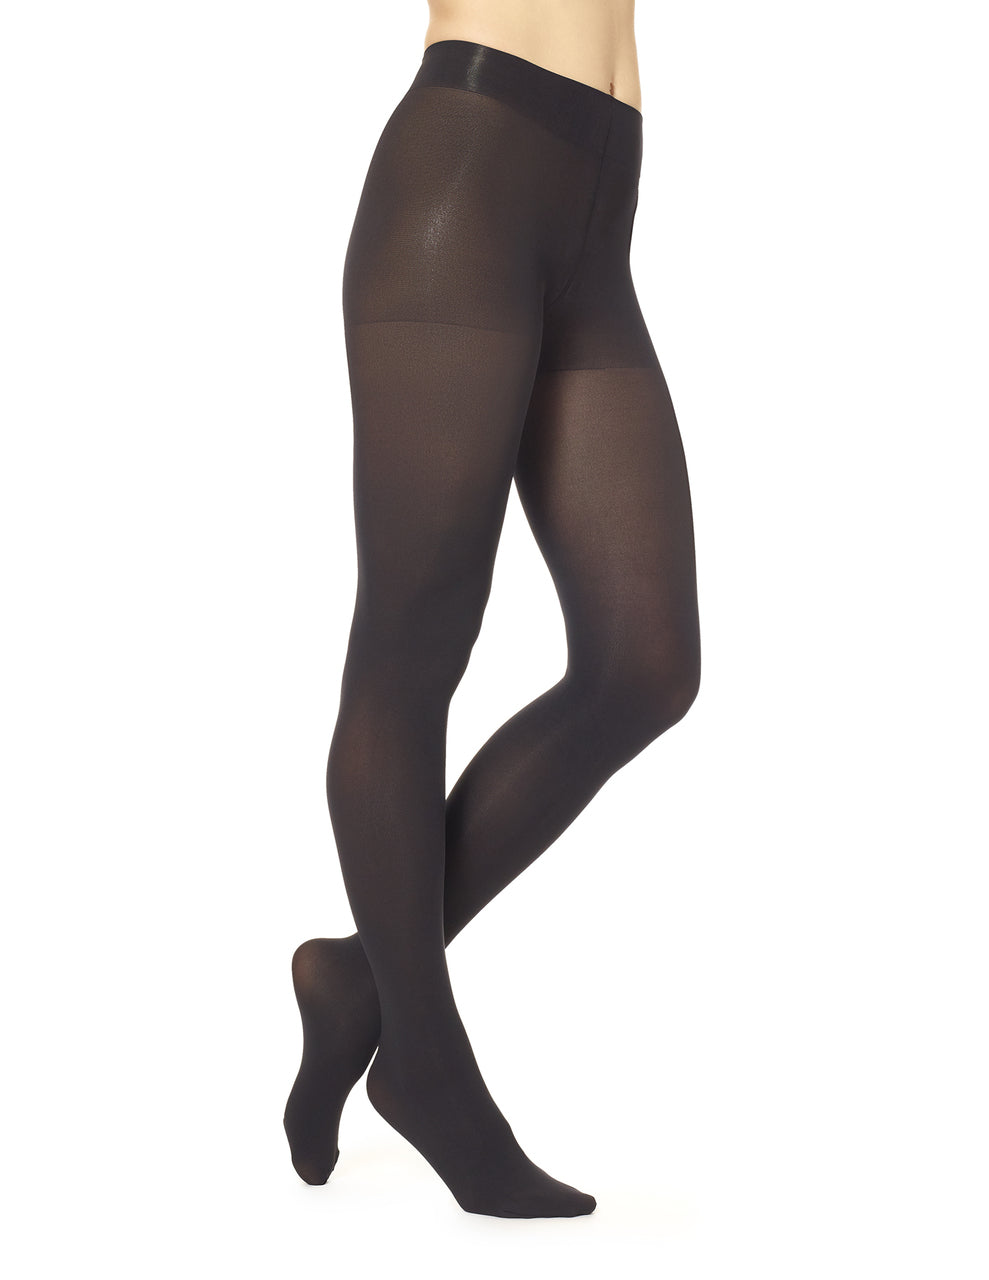 French Lace Control Top Pantyhose